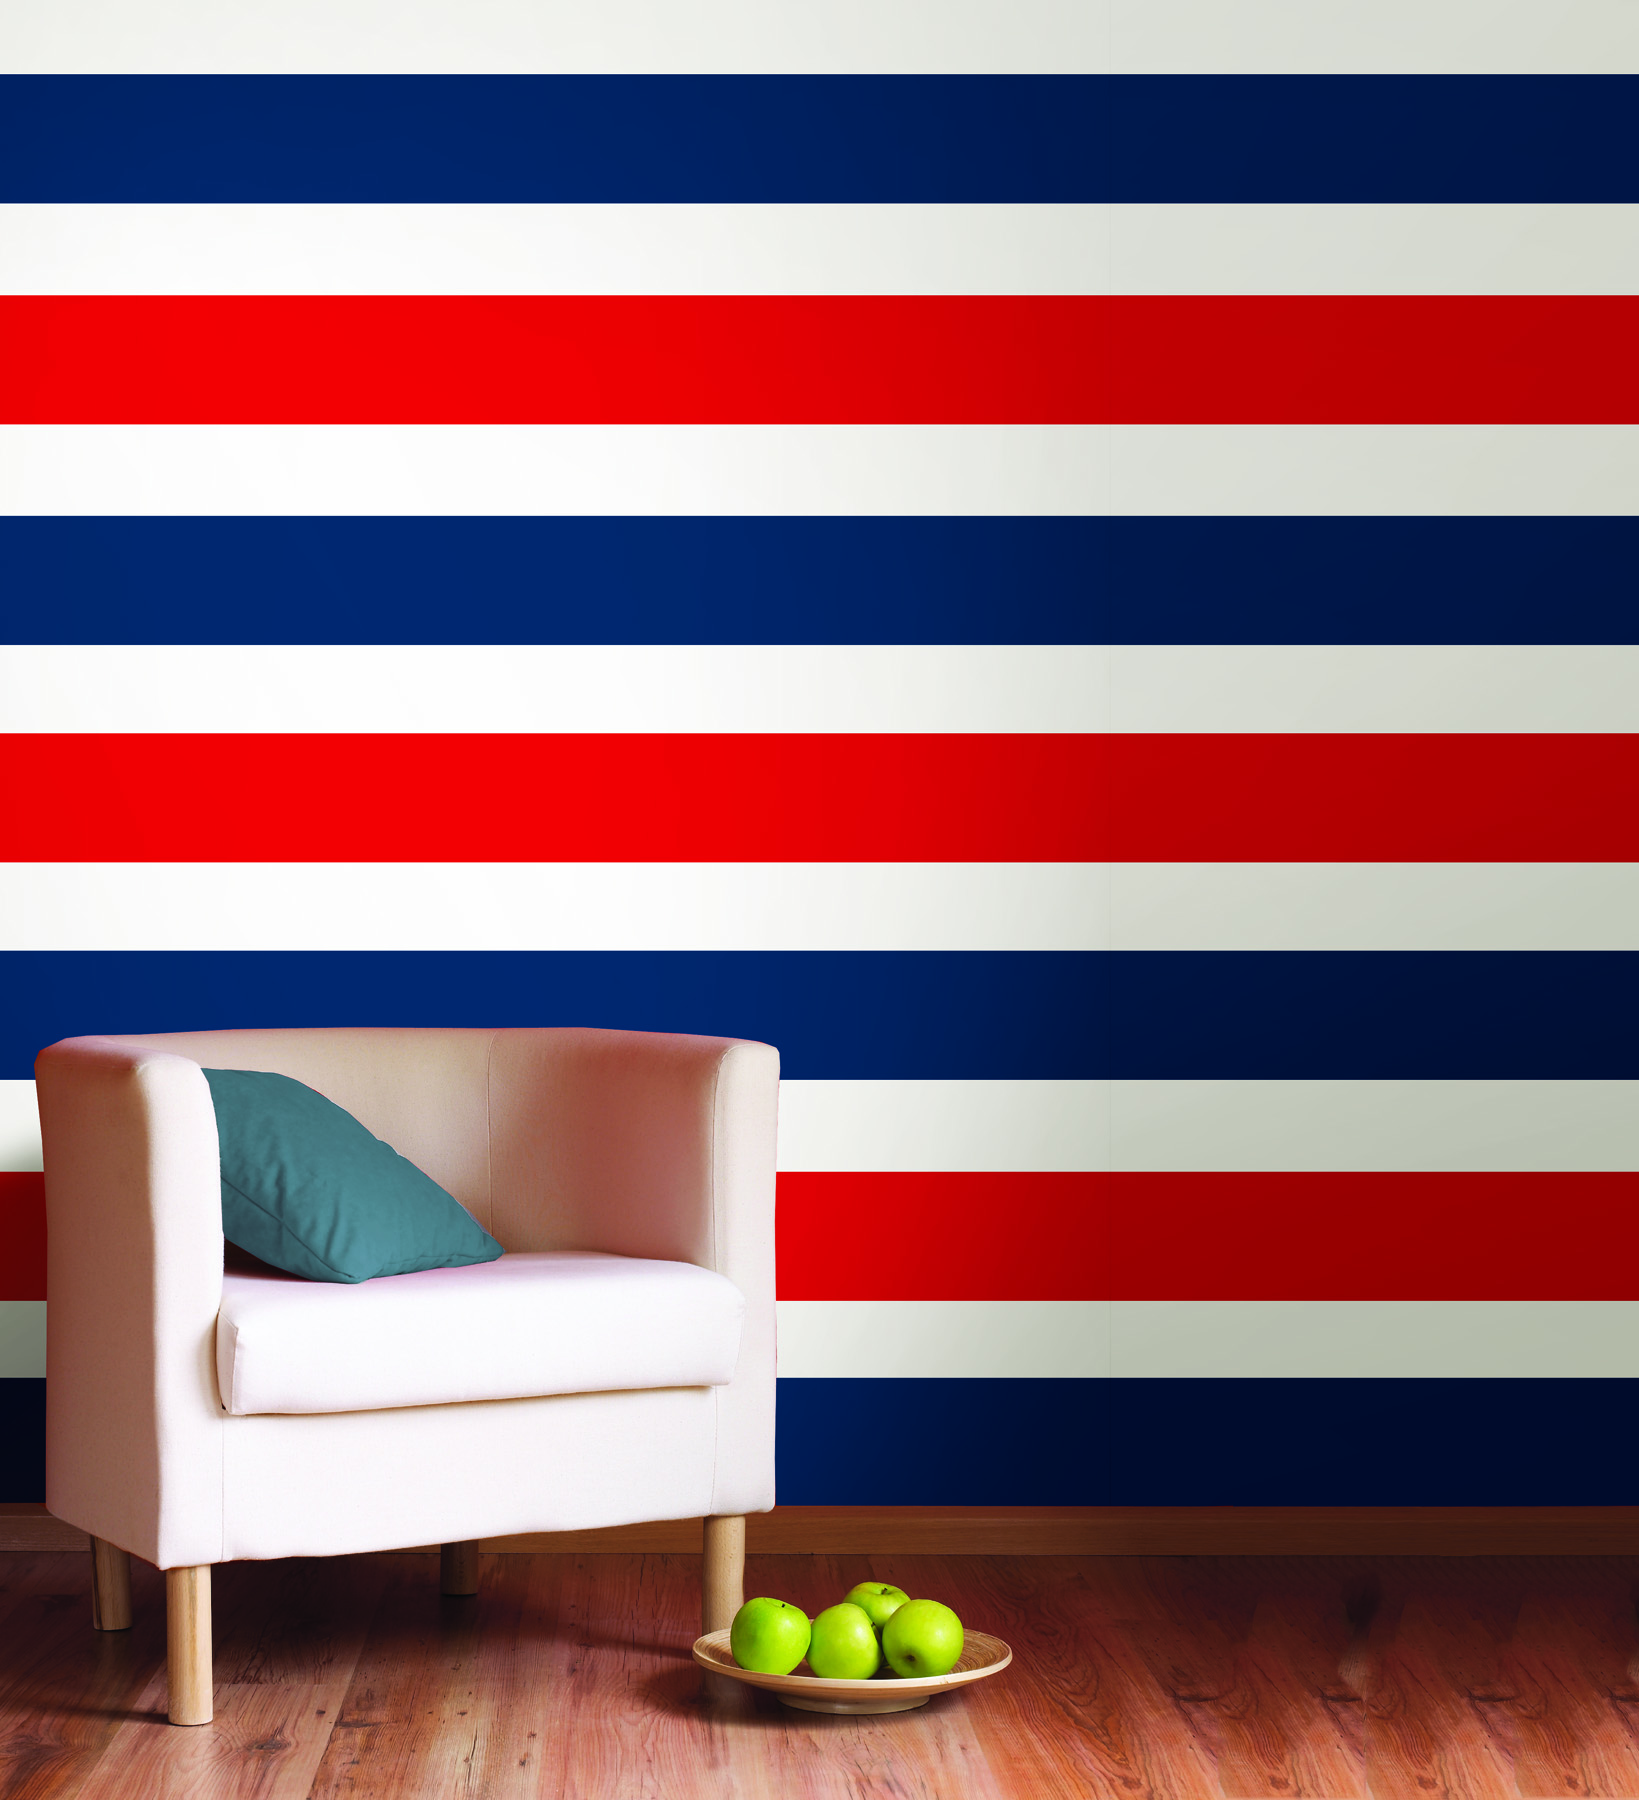 wallpops stripes are so simple to arrange and rearrange your striped 1639x1800